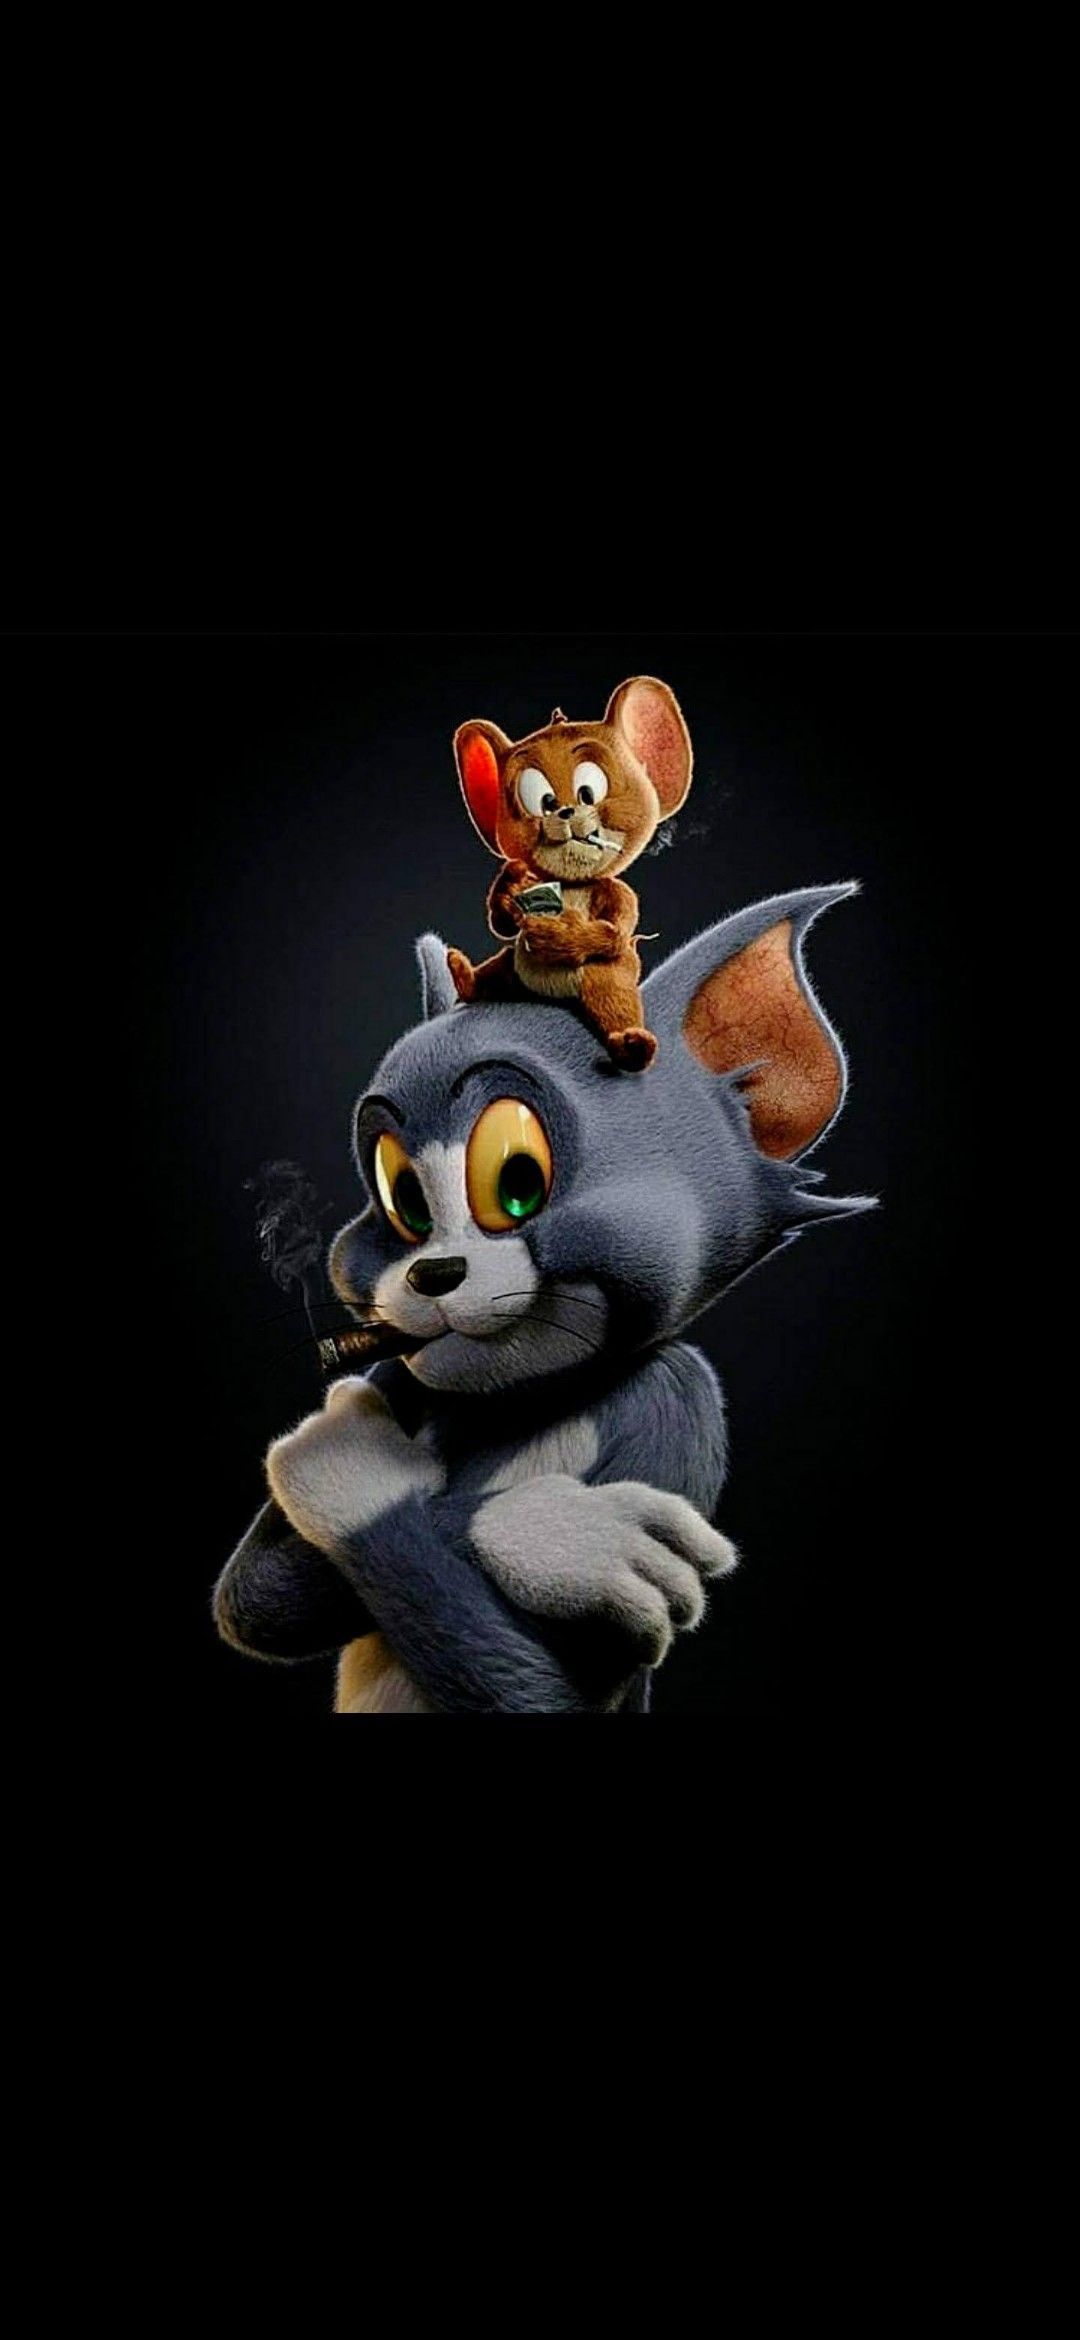 Amoled Archives ⋆ ⋆ Traxzee. Tom and jerry wallpaper, Tom and jerry photo, Cartoon wallpaper hd